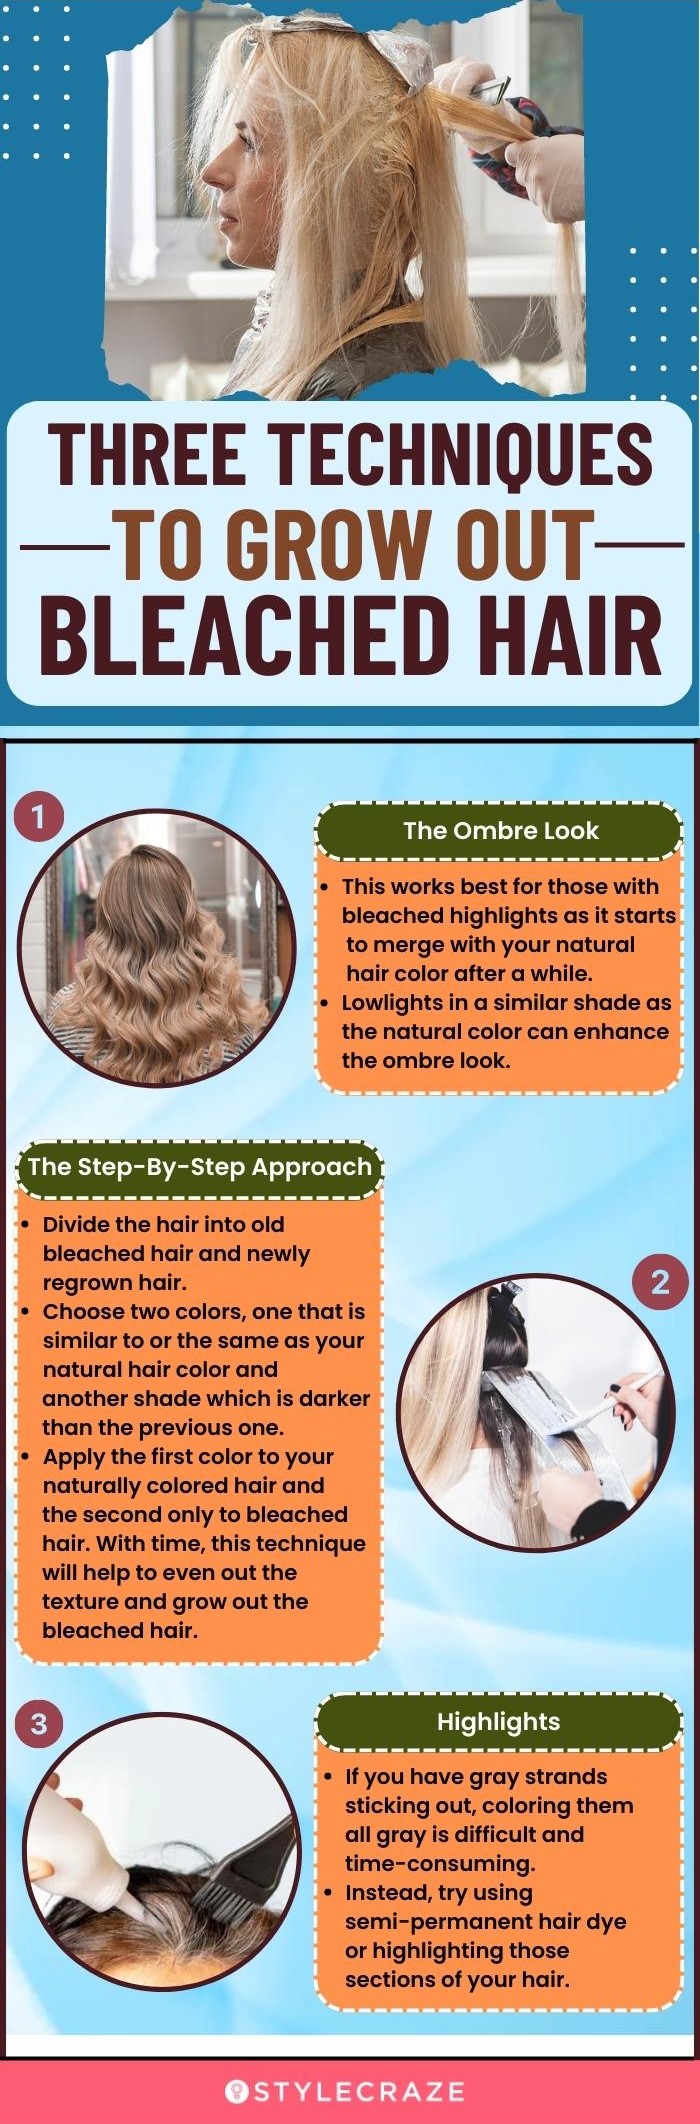 three techniques to grow out bleached hair [infographic]